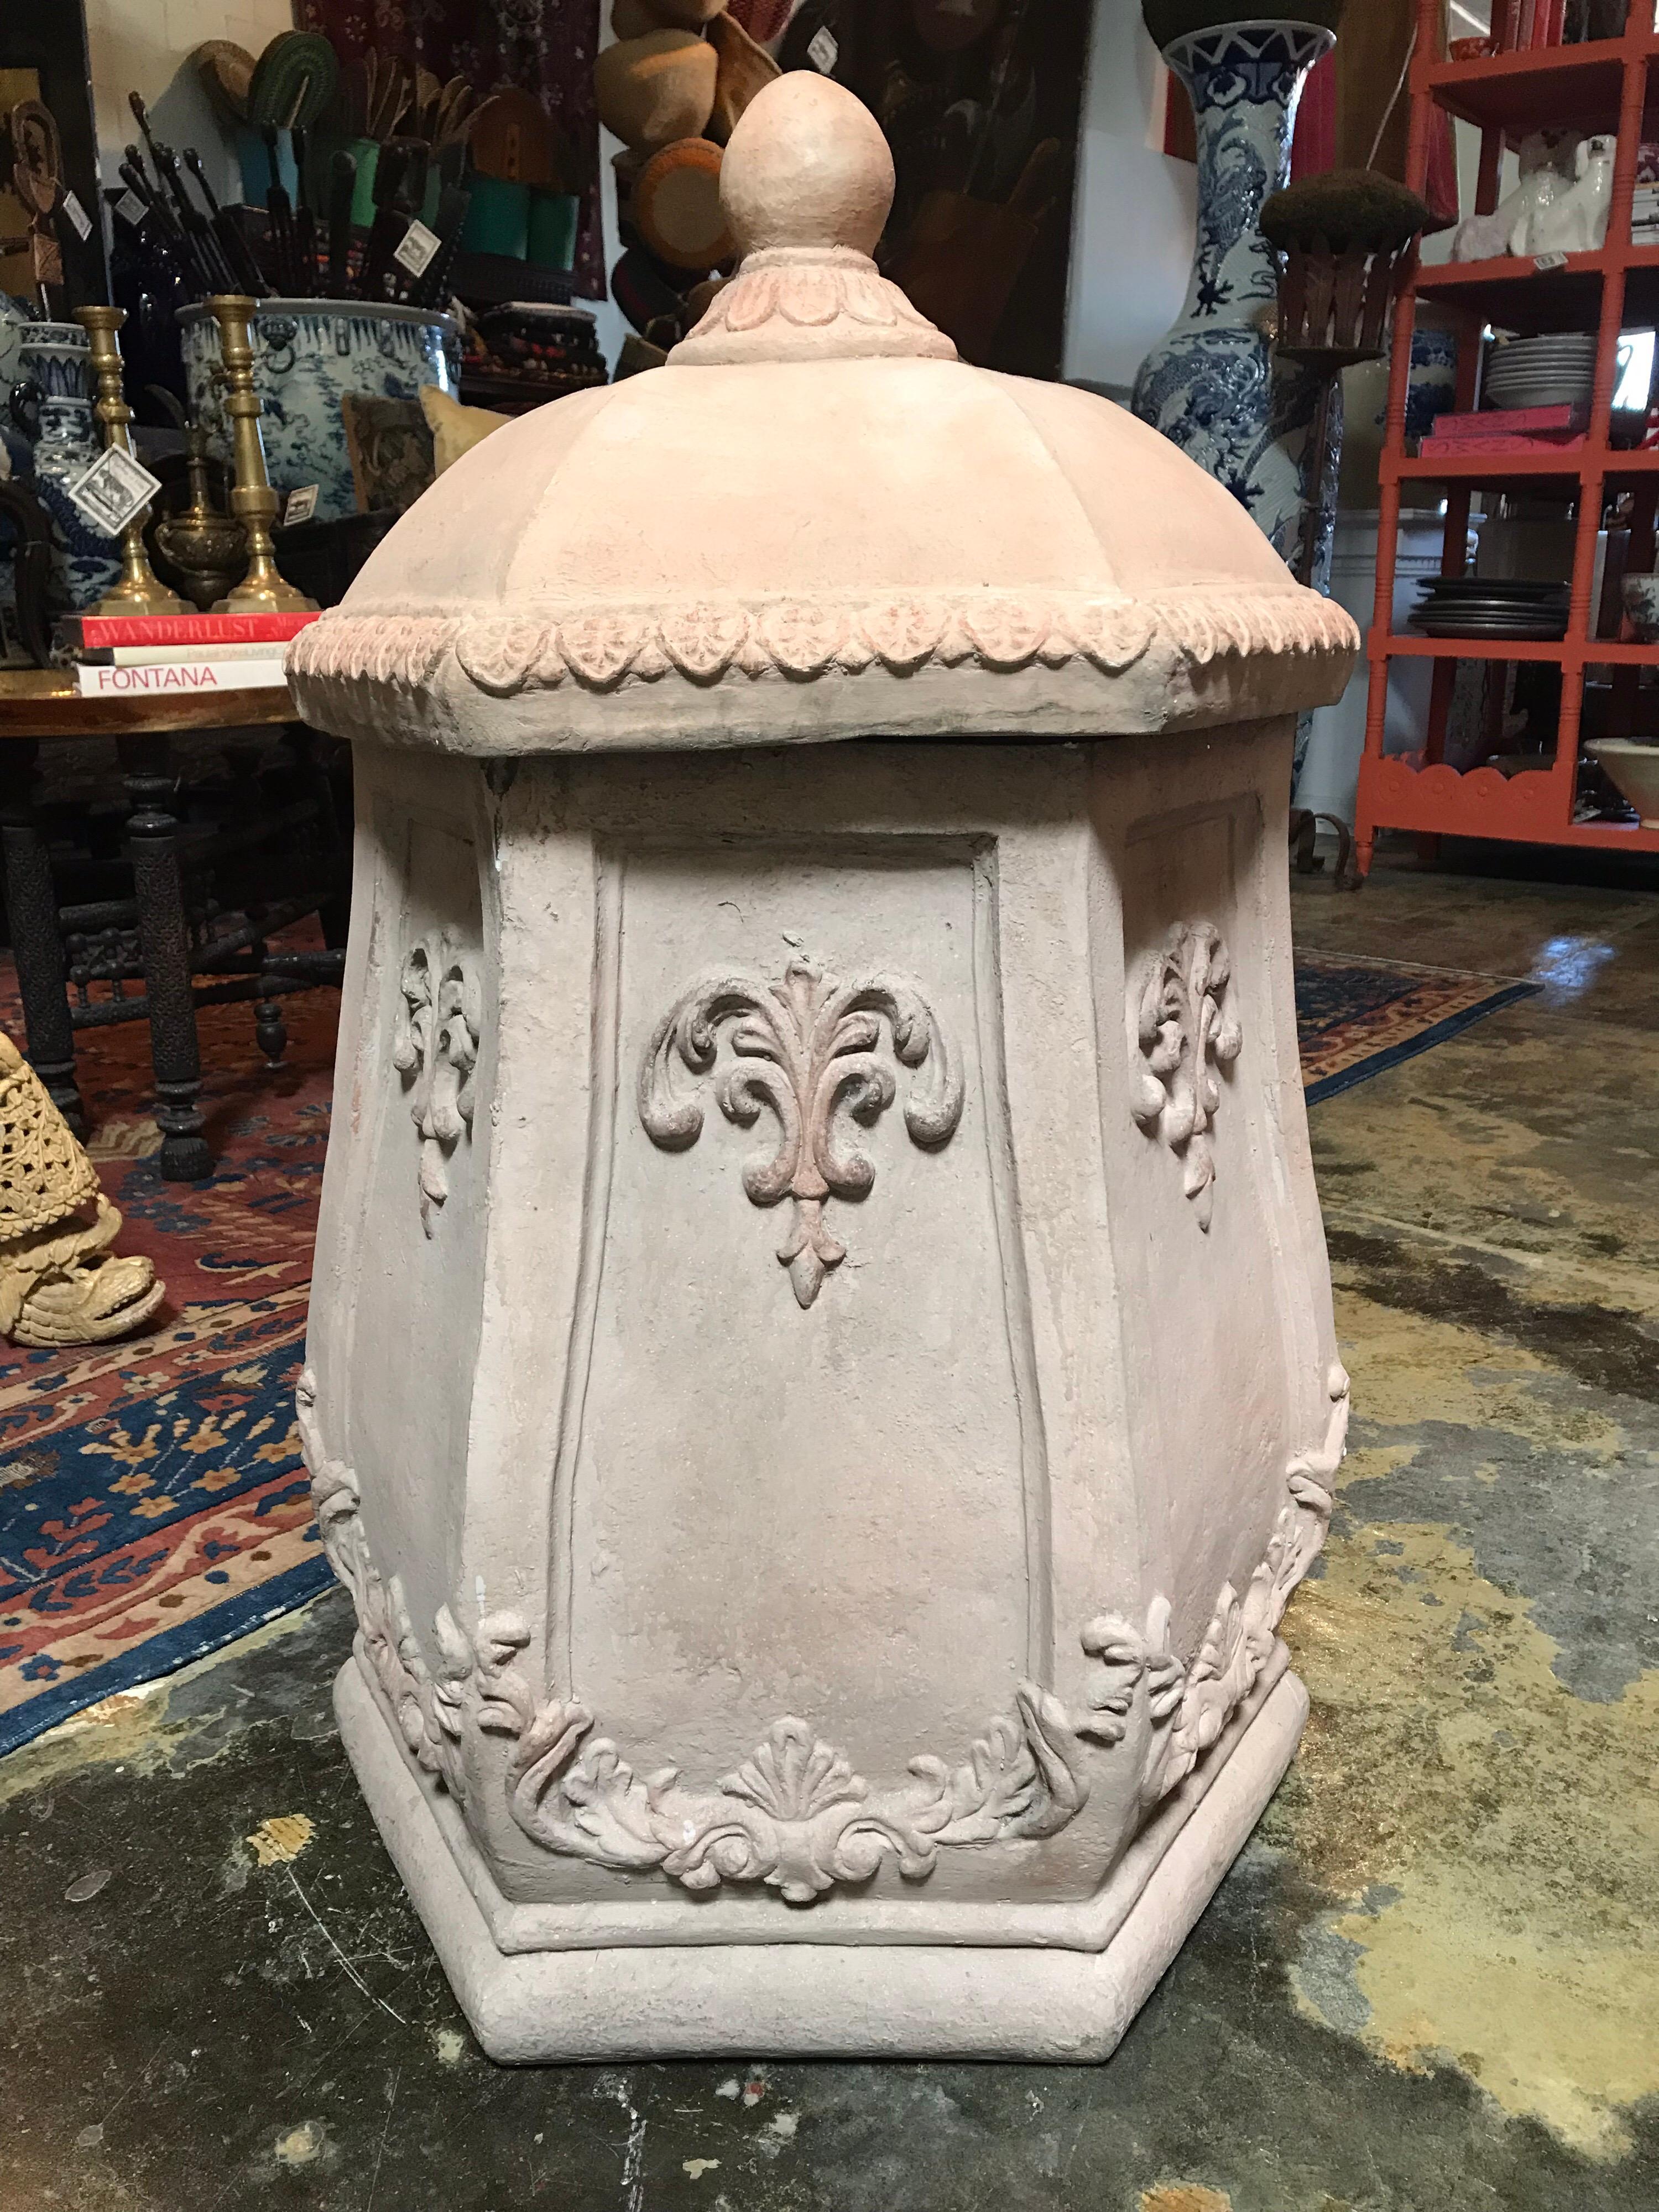 This pair of French waste basket trash cans is made from terracotta and can be used in either an outdoor or an indoor setting. The inside of the wastebaskets have the structural lining to support a bin or trash bag if you so choose.